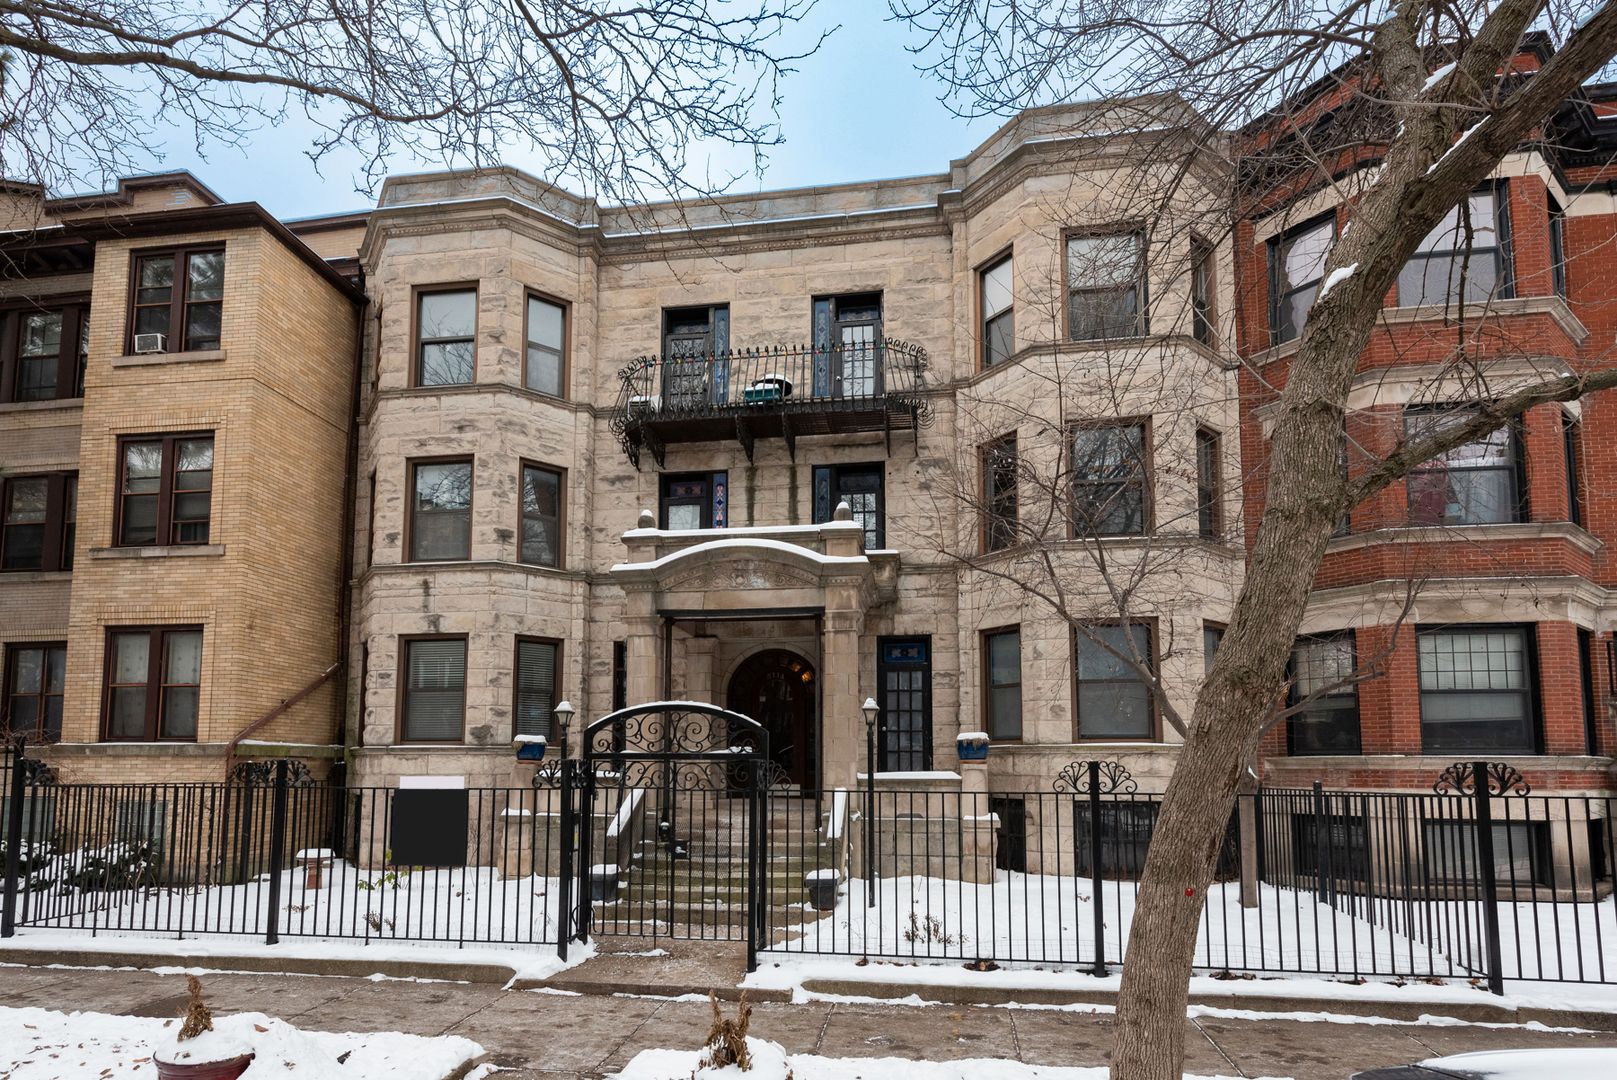 Main Photo: 5114 N KENMORE Avenue Unit 3N in Chicago: CHI - Uptown Residential for sale ()  : MLS®# 11313421